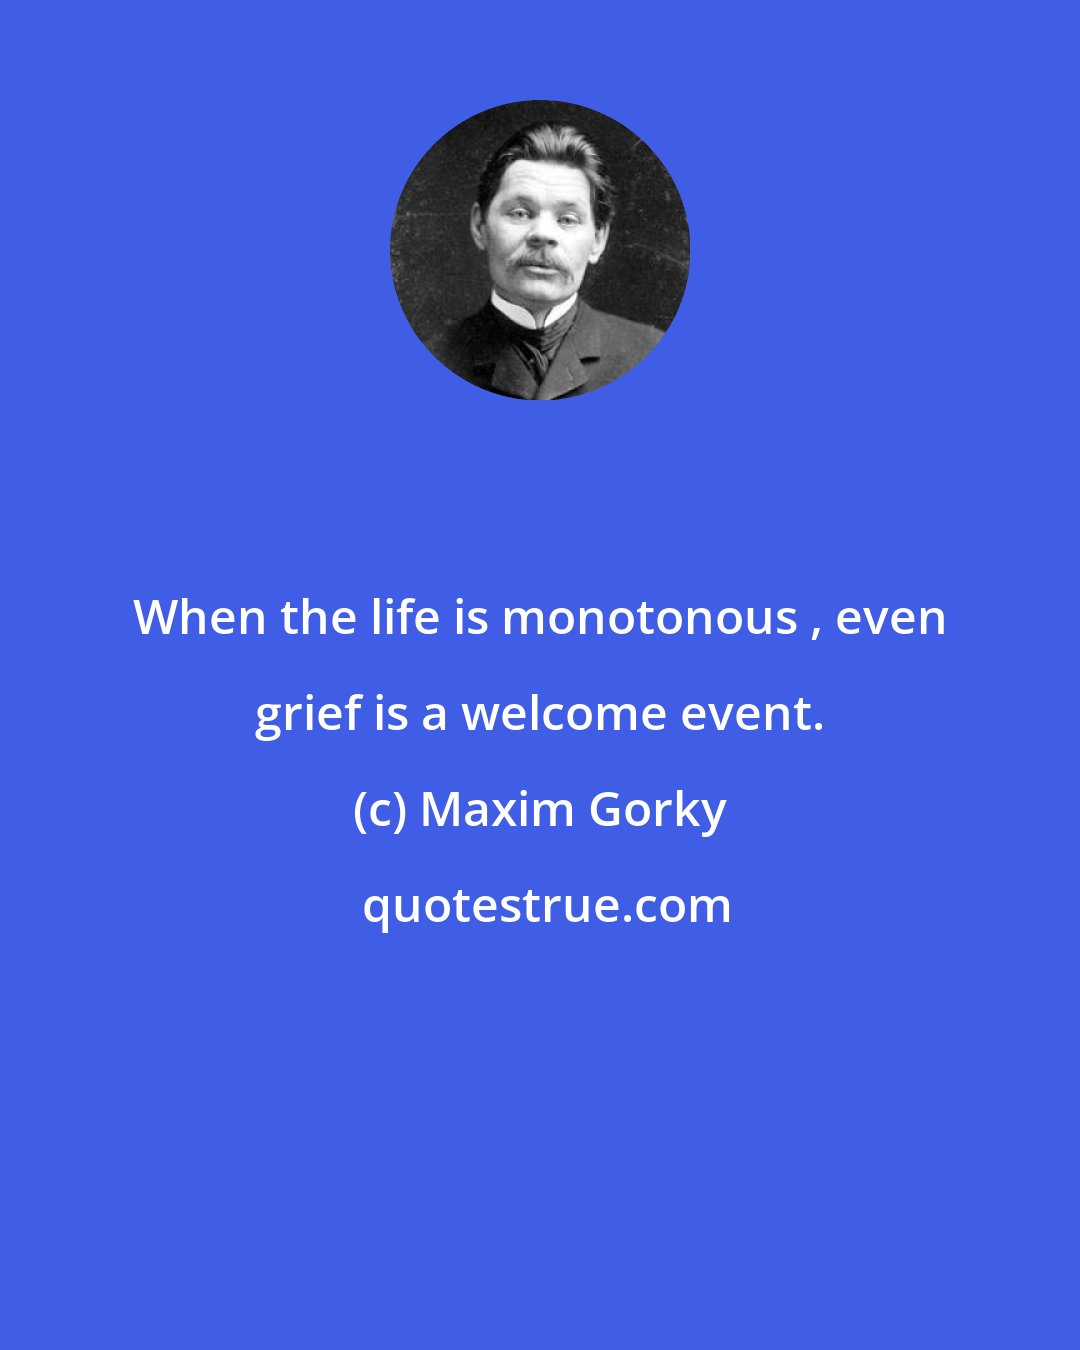 Maxim Gorky: When the life is monotonous , even grief is a welcome event.